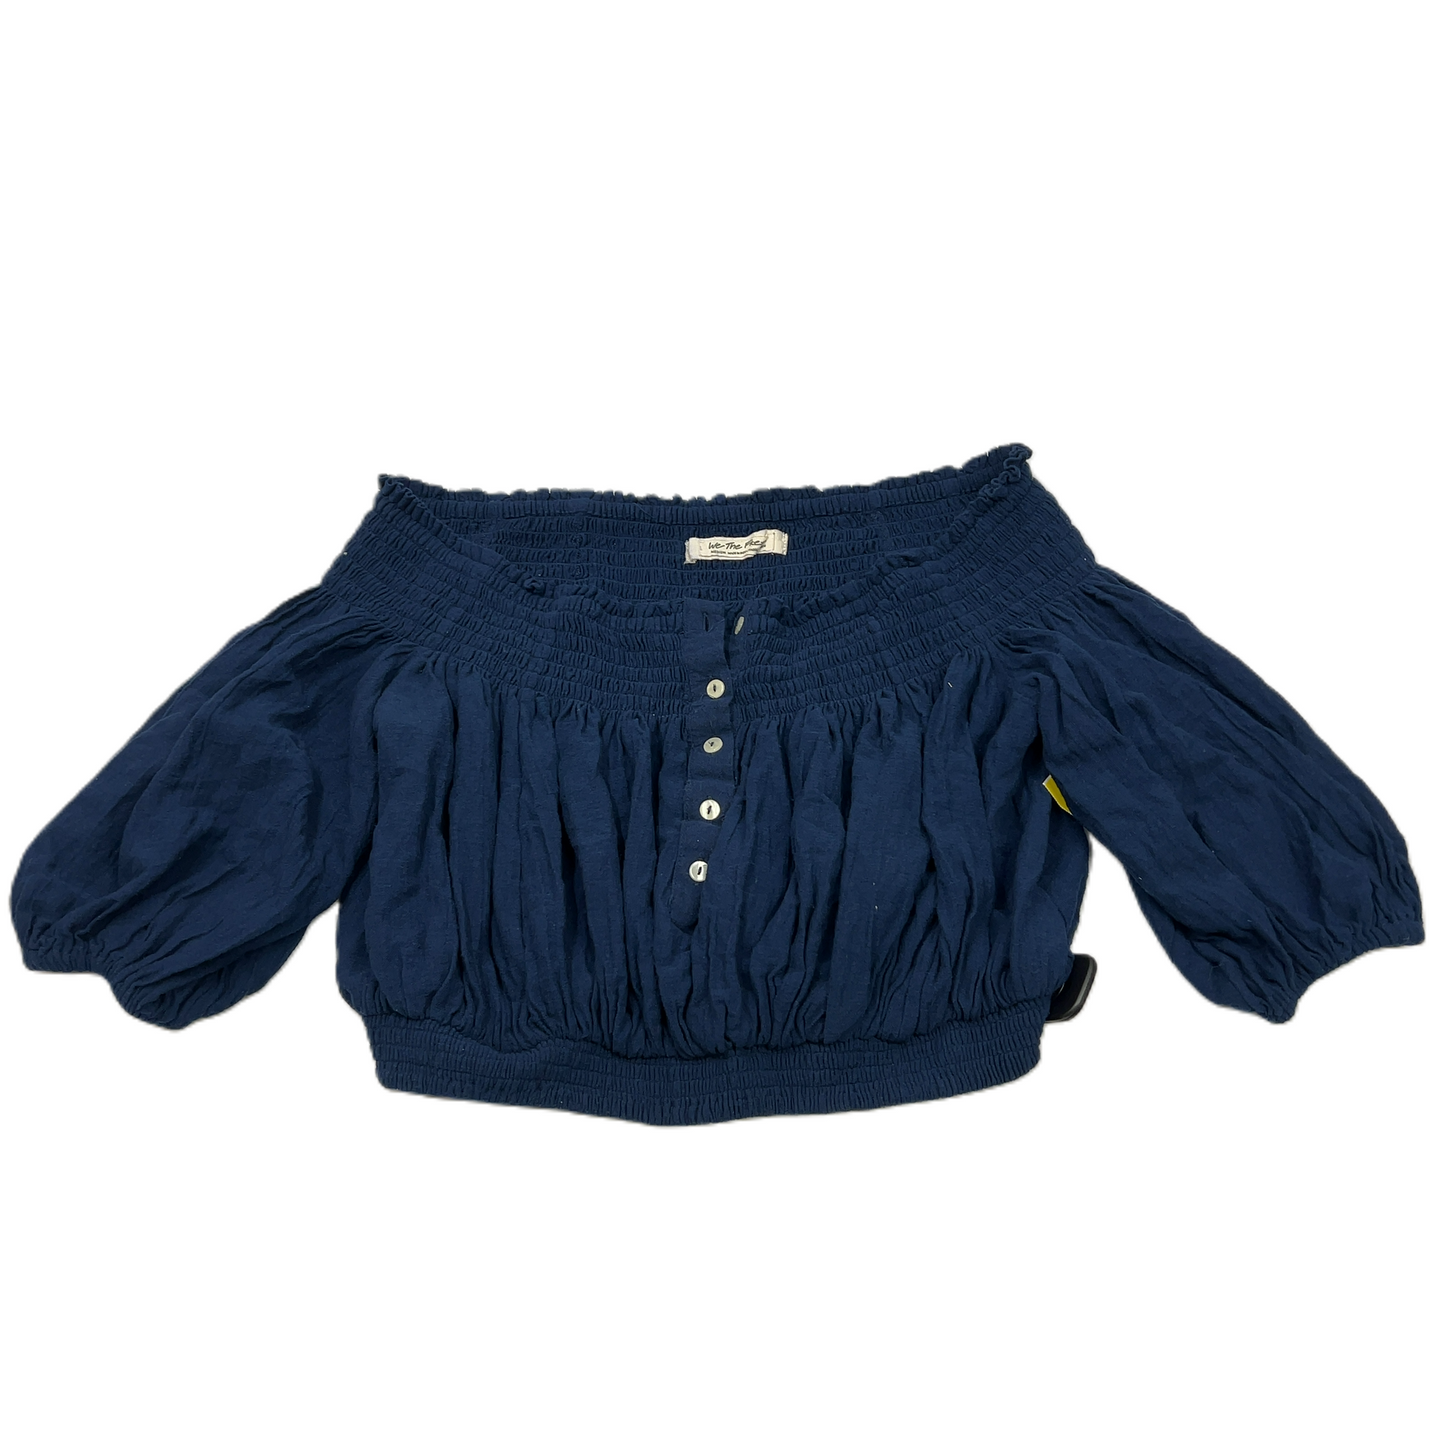 Navy  Top 3/4 Sleeve By We The Free  Size: M